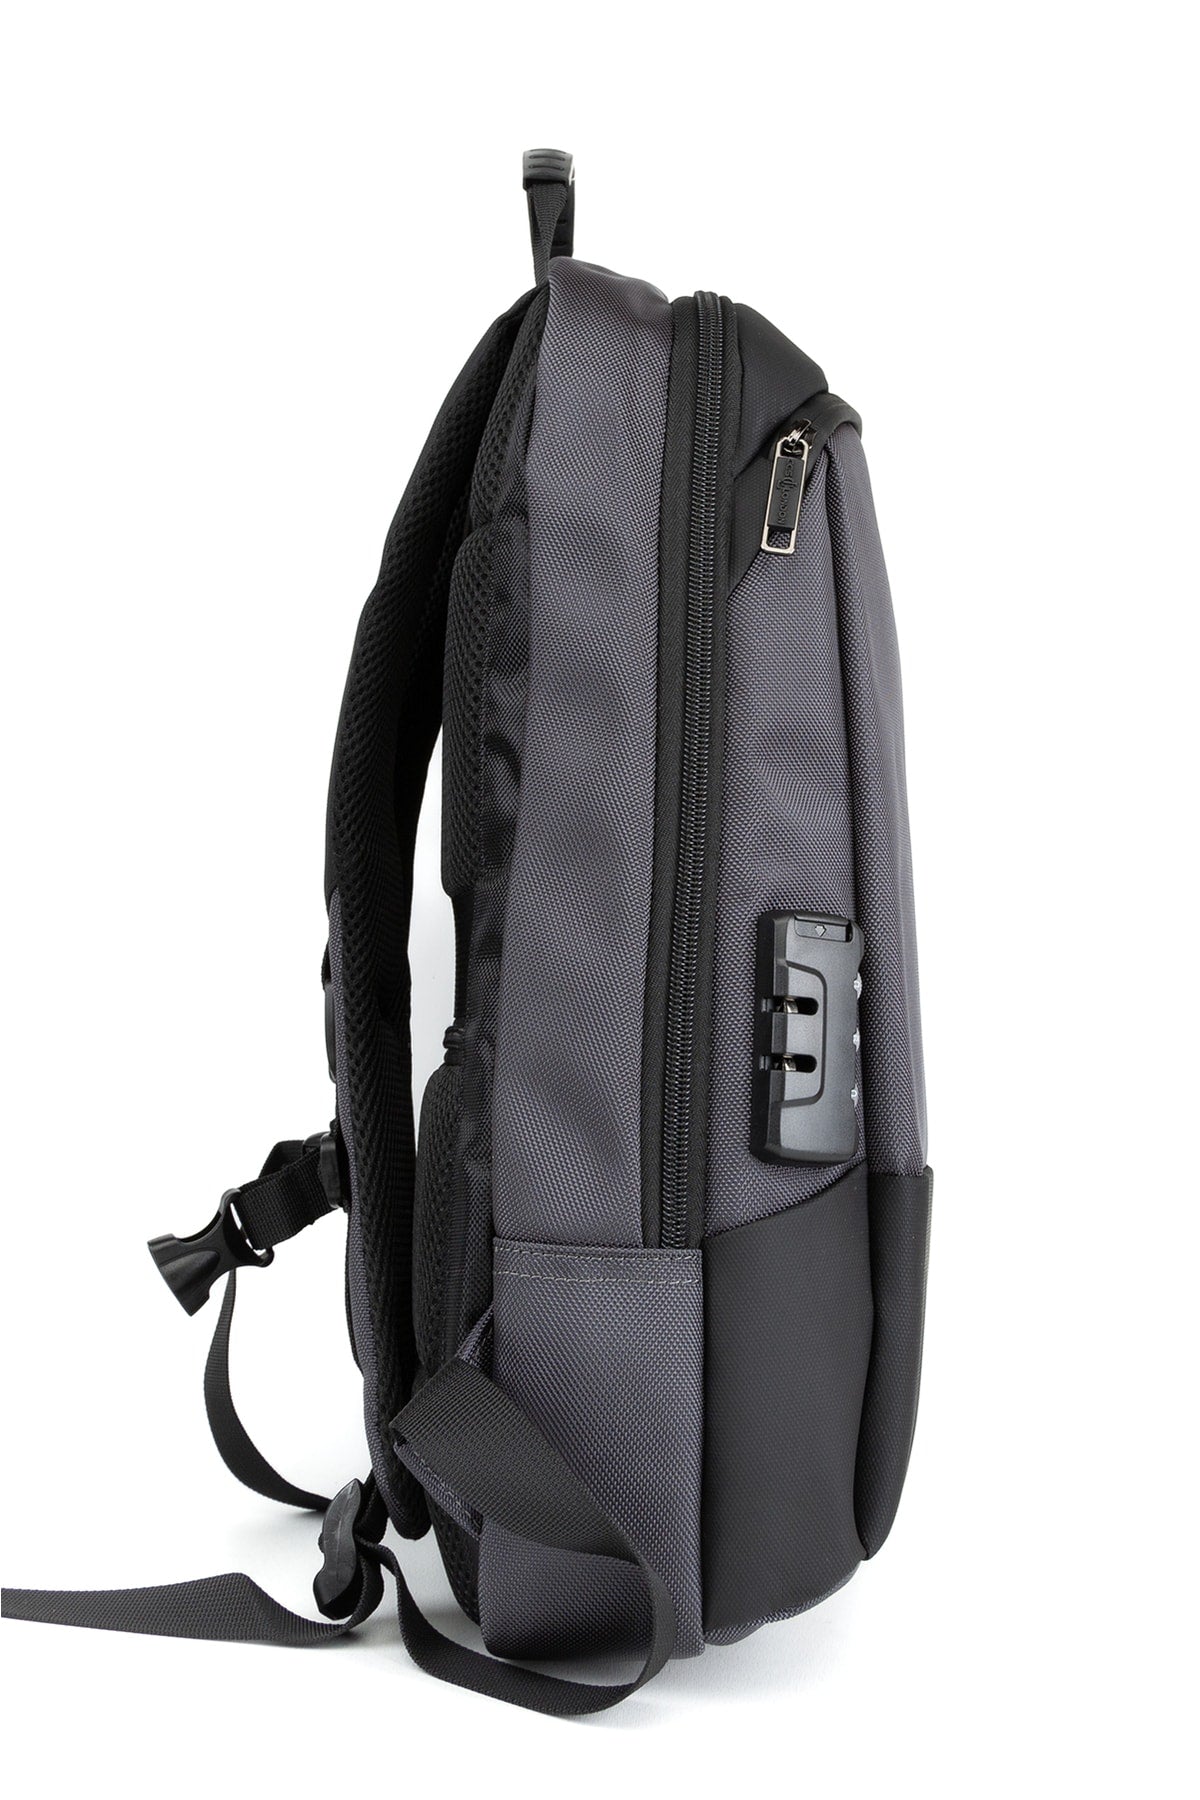 Protect Your Laptop With Waterproof Lined Backpack: 15.6 Inch Laptop Compartment, USB Wired